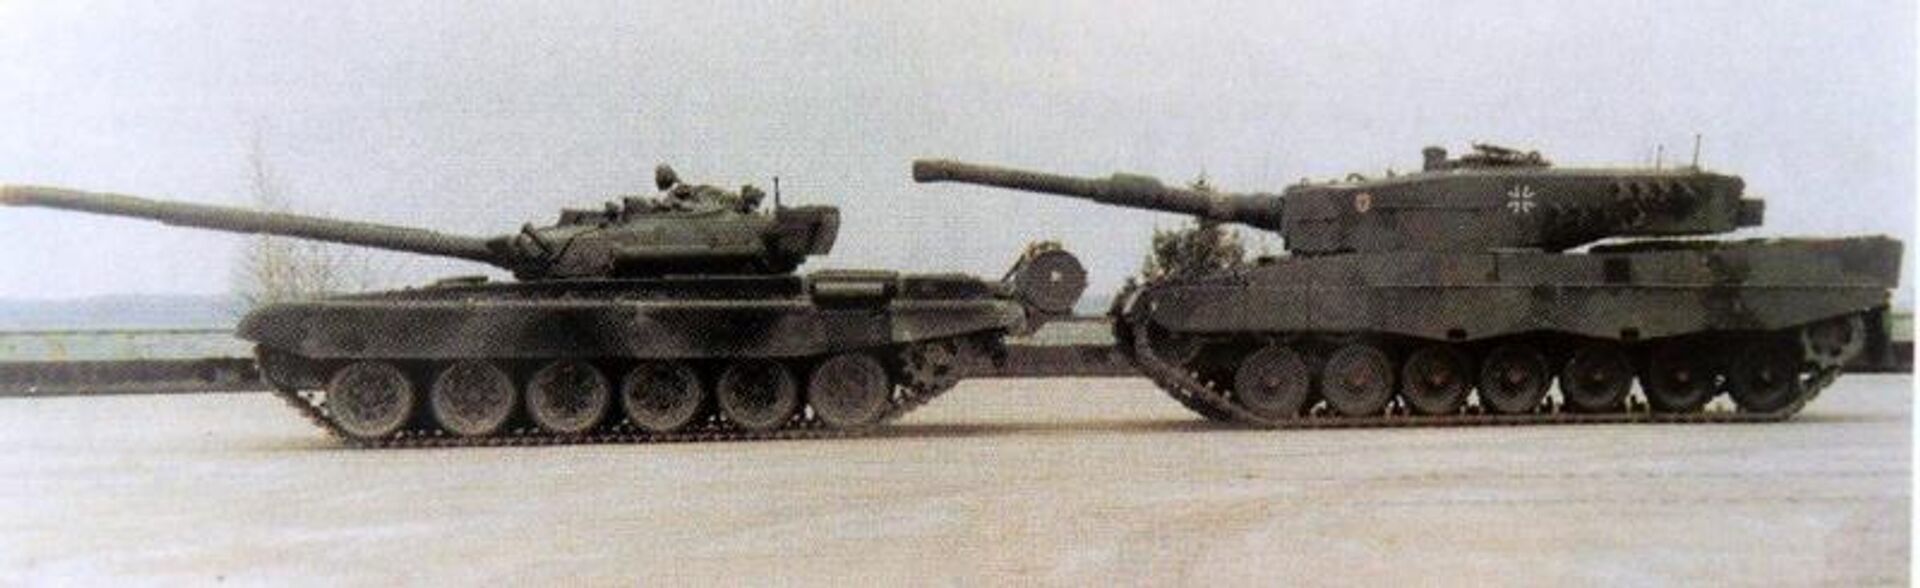 A rare photo featuring a side by side comparison of an 80s Leopard 2 vs a Soviet-era T-72, predecessor to the T-90 series of MBTs. - Sputnik International, 1920, 09.09.2023